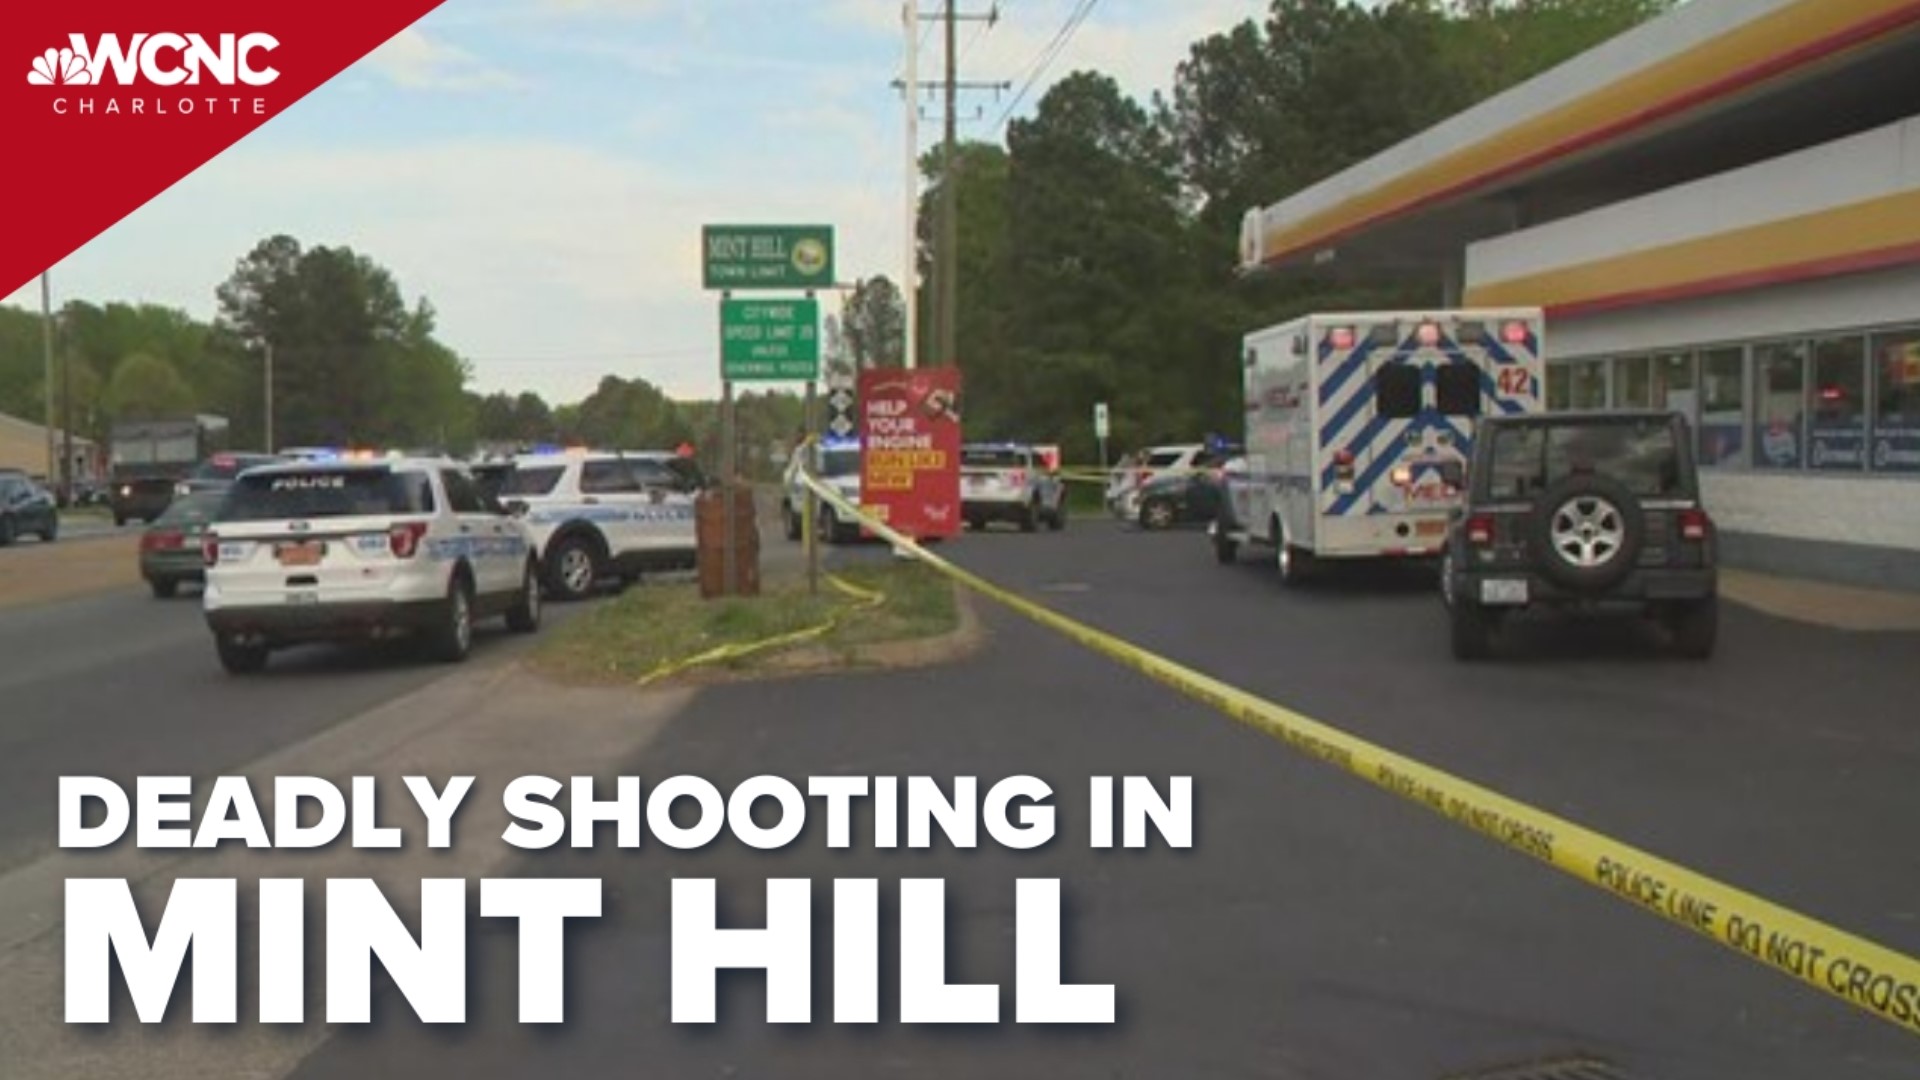 The Mint Hill Police Department is now leading the investigation.